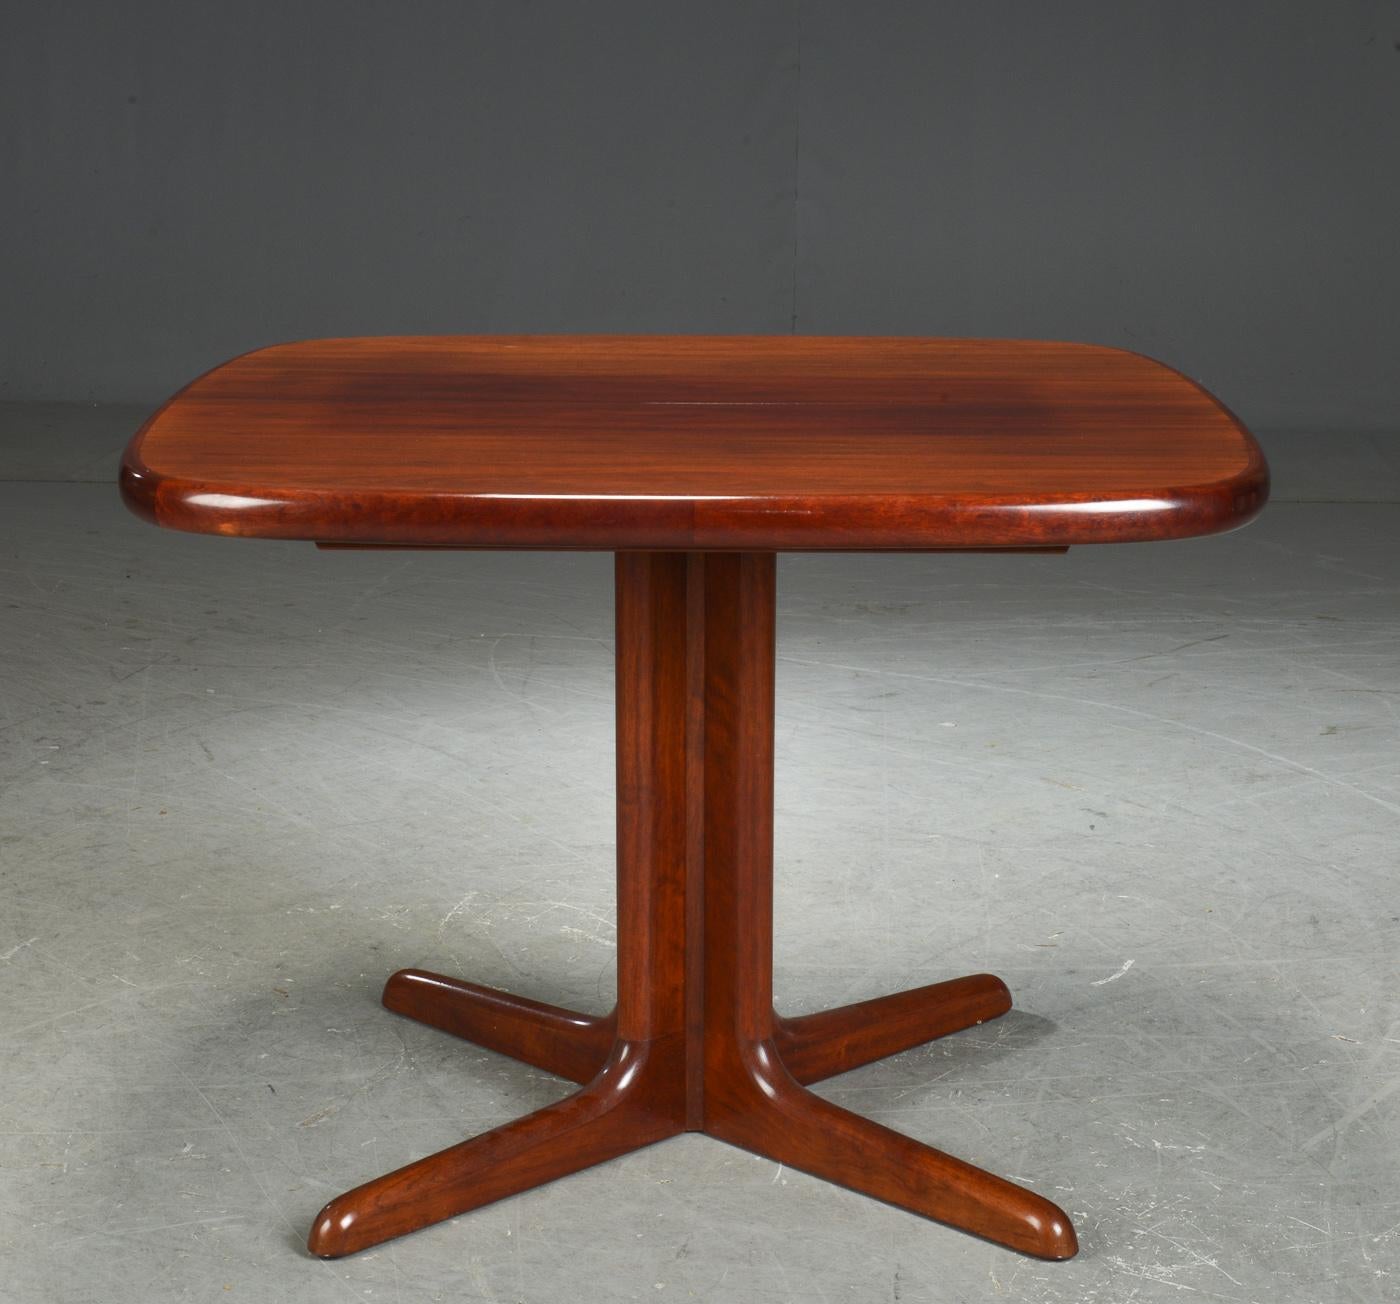 Mahogany extending construction with two plated made in the 1970s in Denmark by Skovby.
Dimensions:
H 72, L 100, B 100 cm. Pull-off plates two 50 cm.